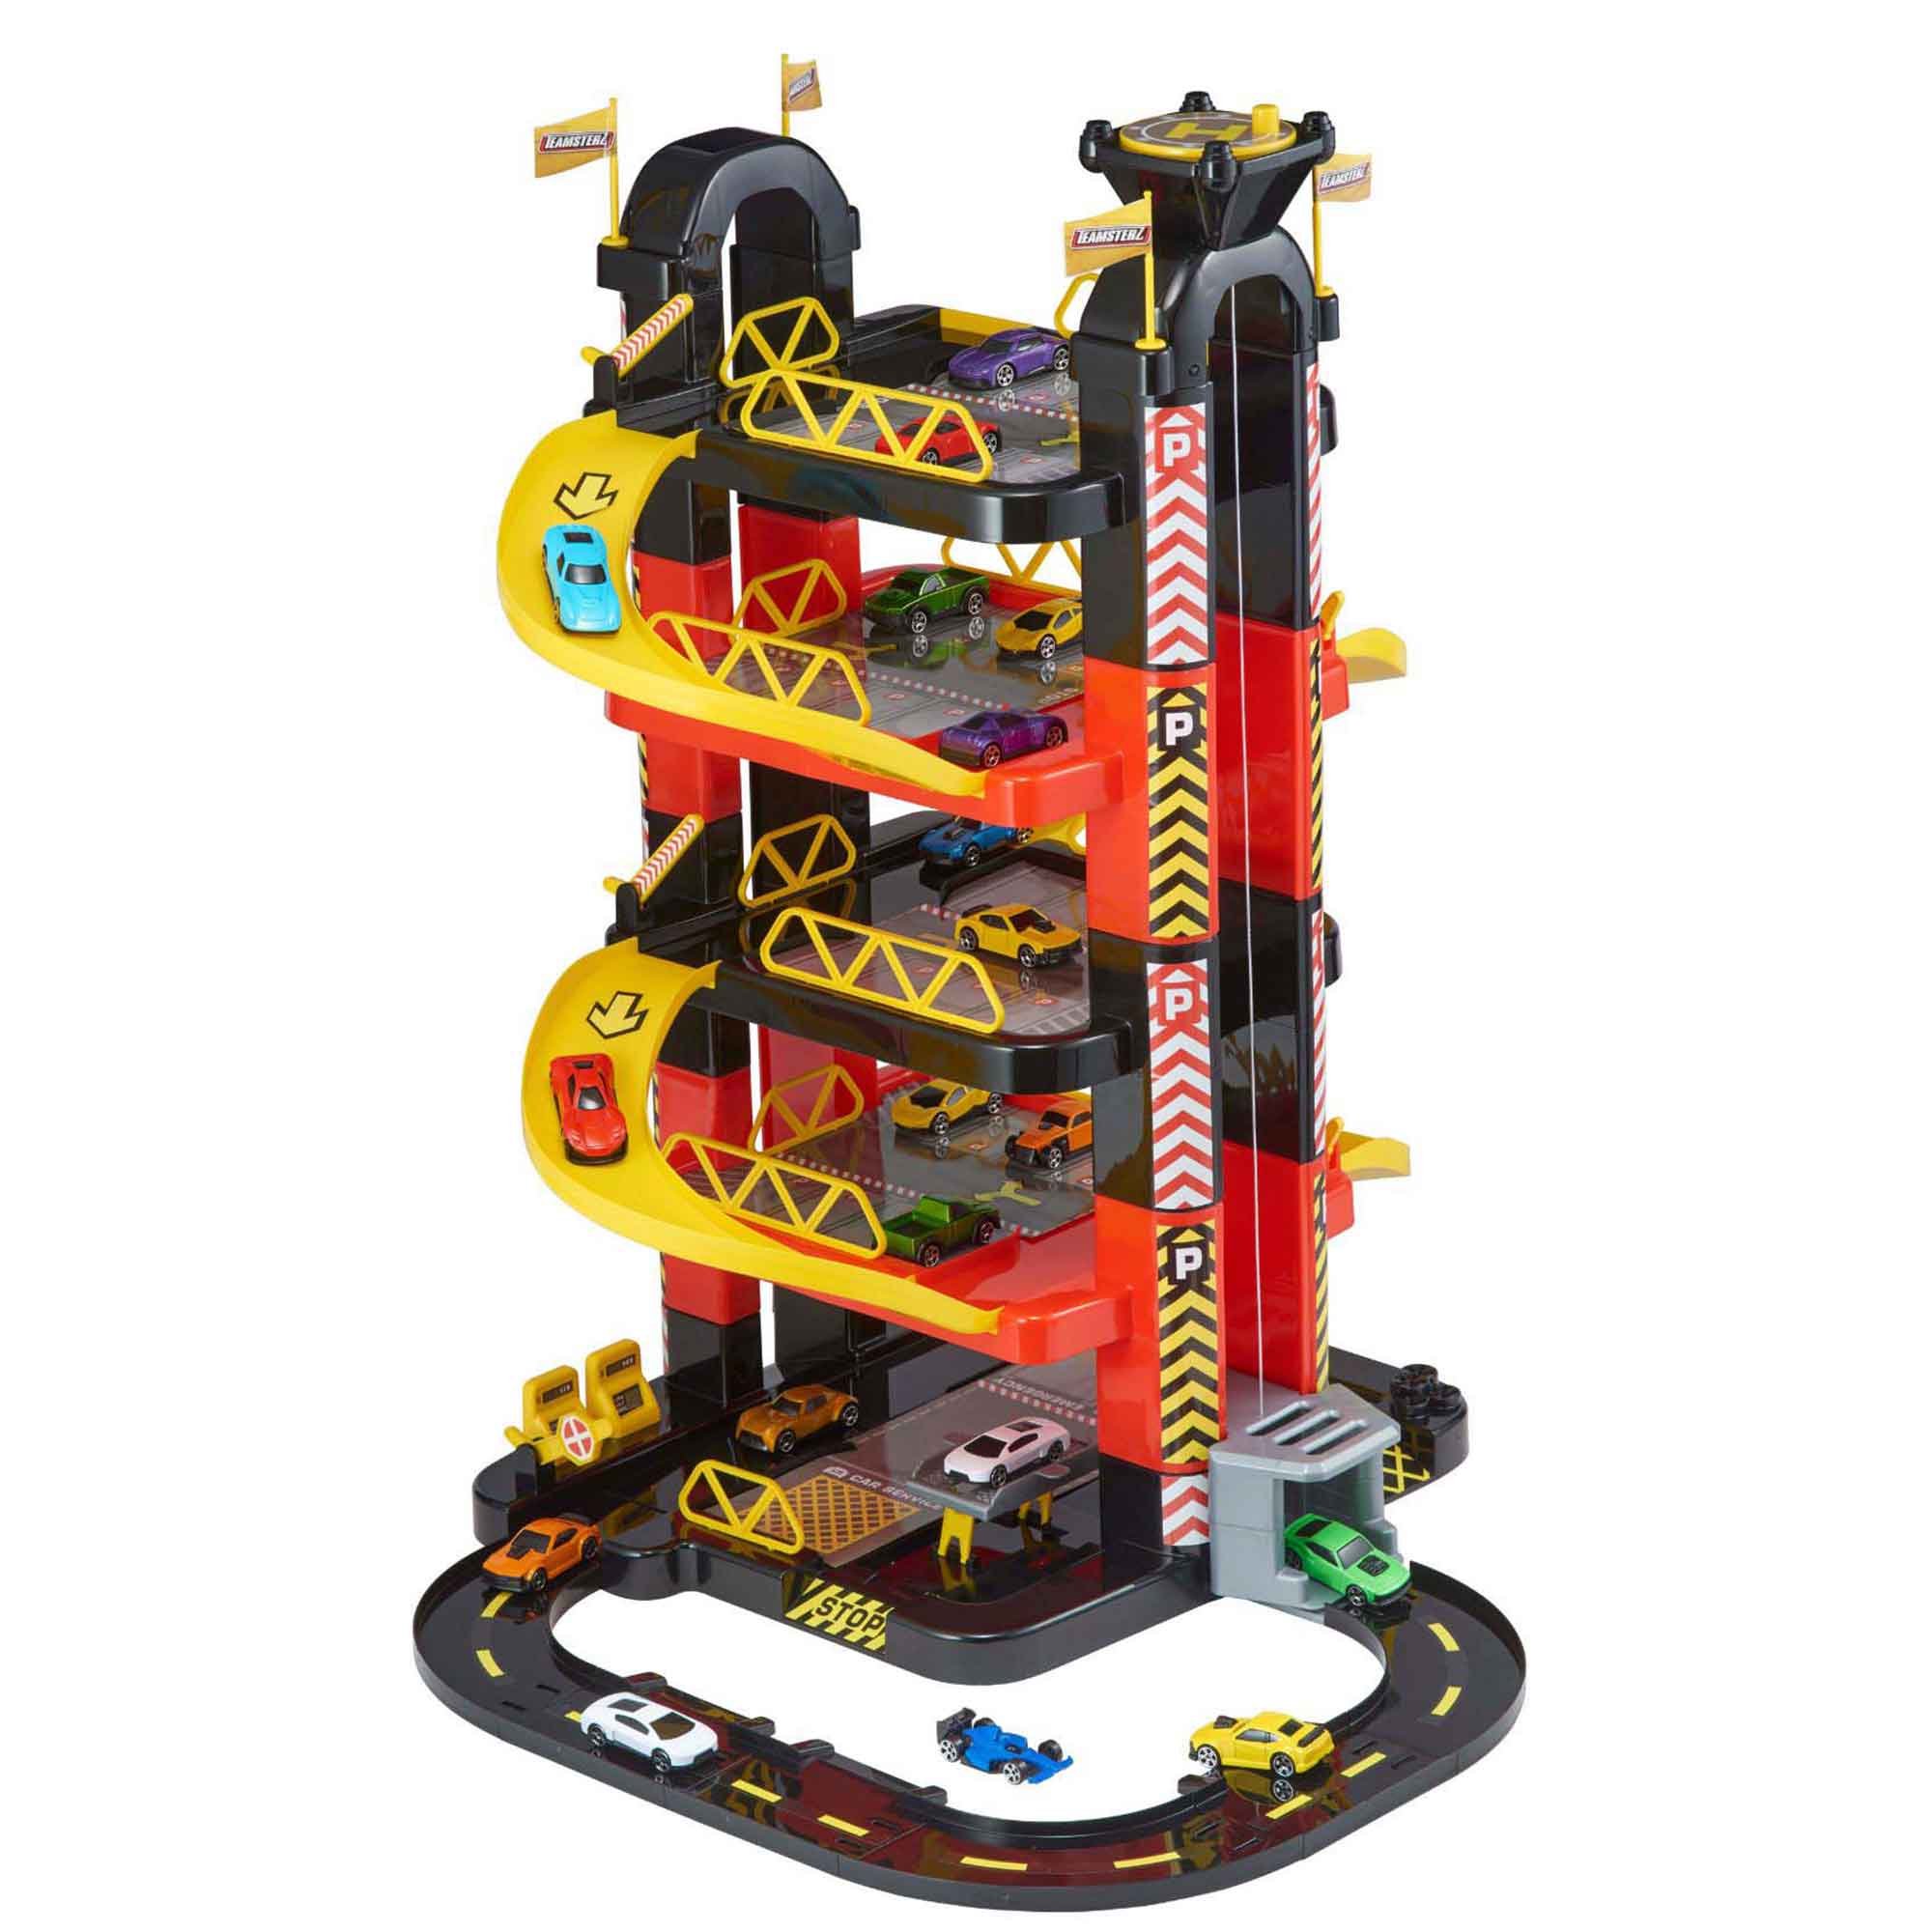 Image of Teamsterz Metro City 5 Level Tower Garage - Includes 5 Die Cast Cars